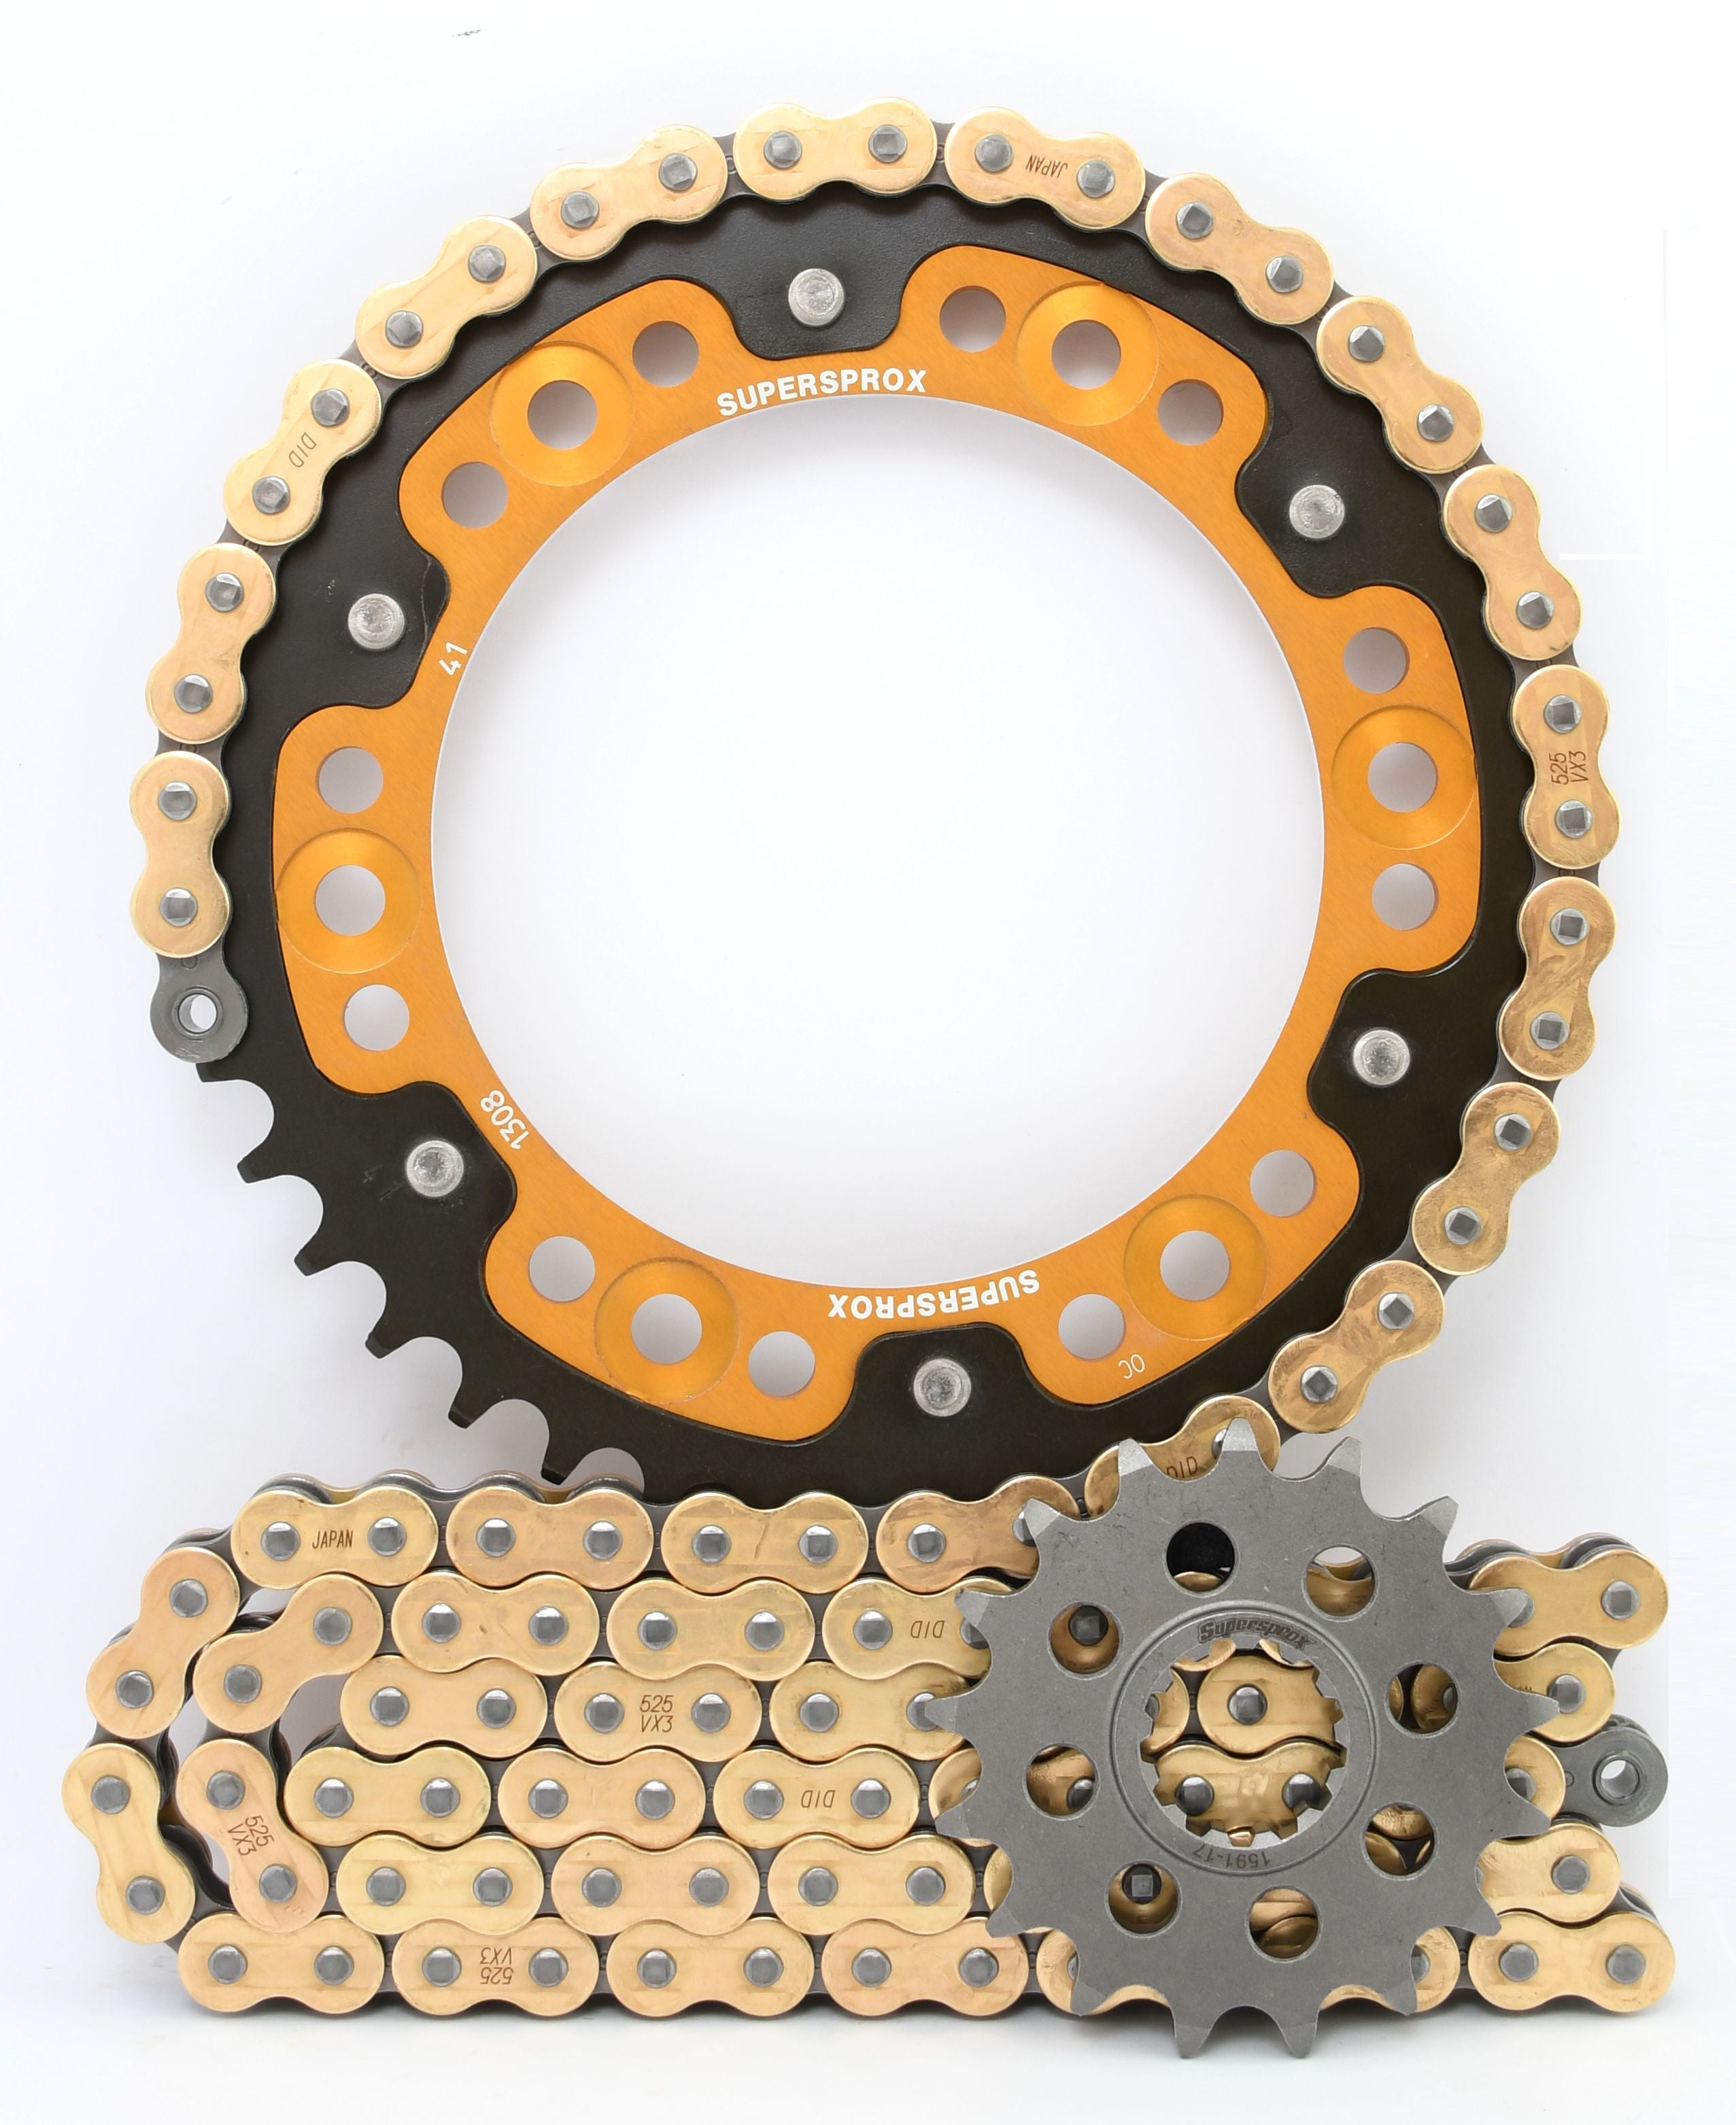 Supersprox Chain & Sprocket Kit for Honda CBR600RR 2007-2016 - 520 Conversion - Standard Gearing